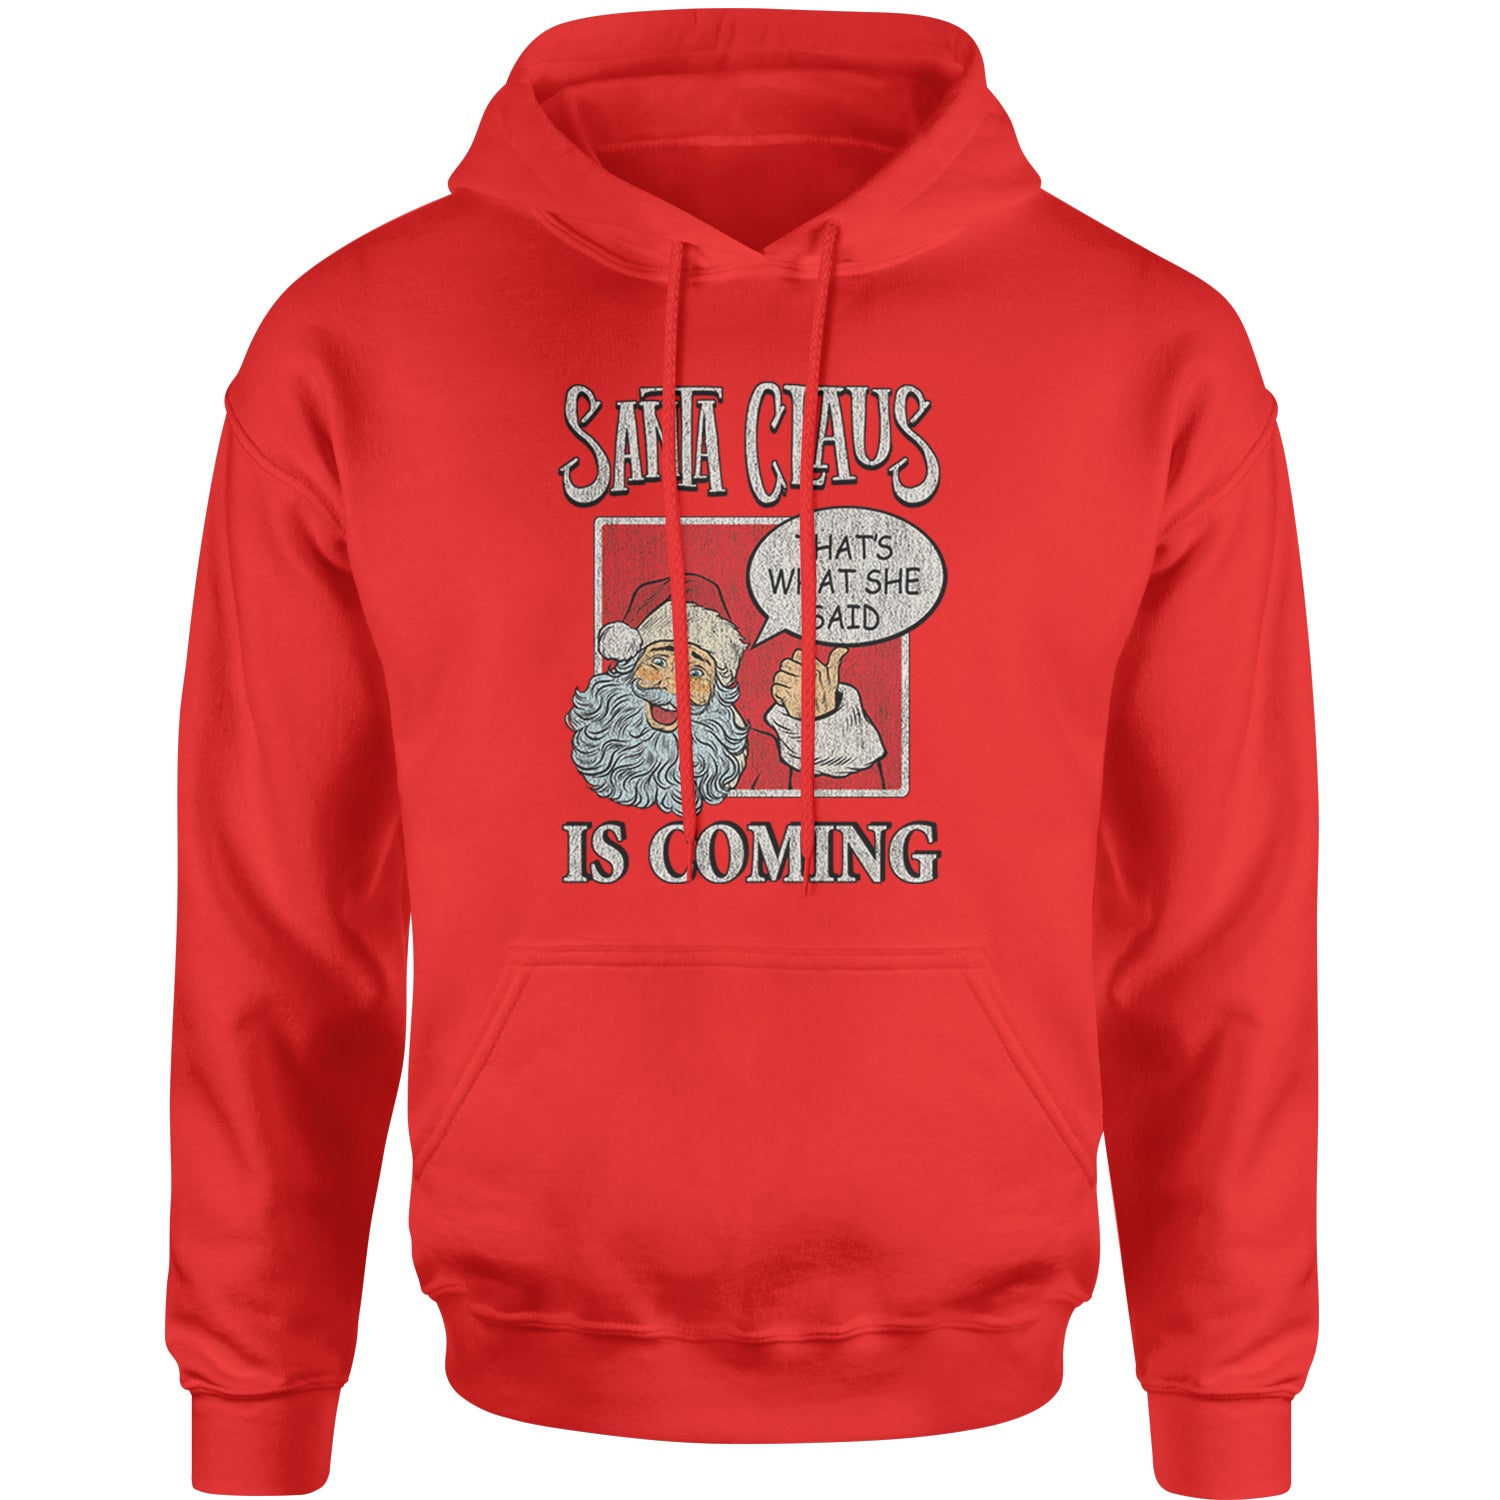 Santa Claus Is Coming - That's What She Said Adult Hoodie Sweatshirt christmas, dunder, holiday, michael, mifflin, office, sweater, ugly, xmas by Expression Tees